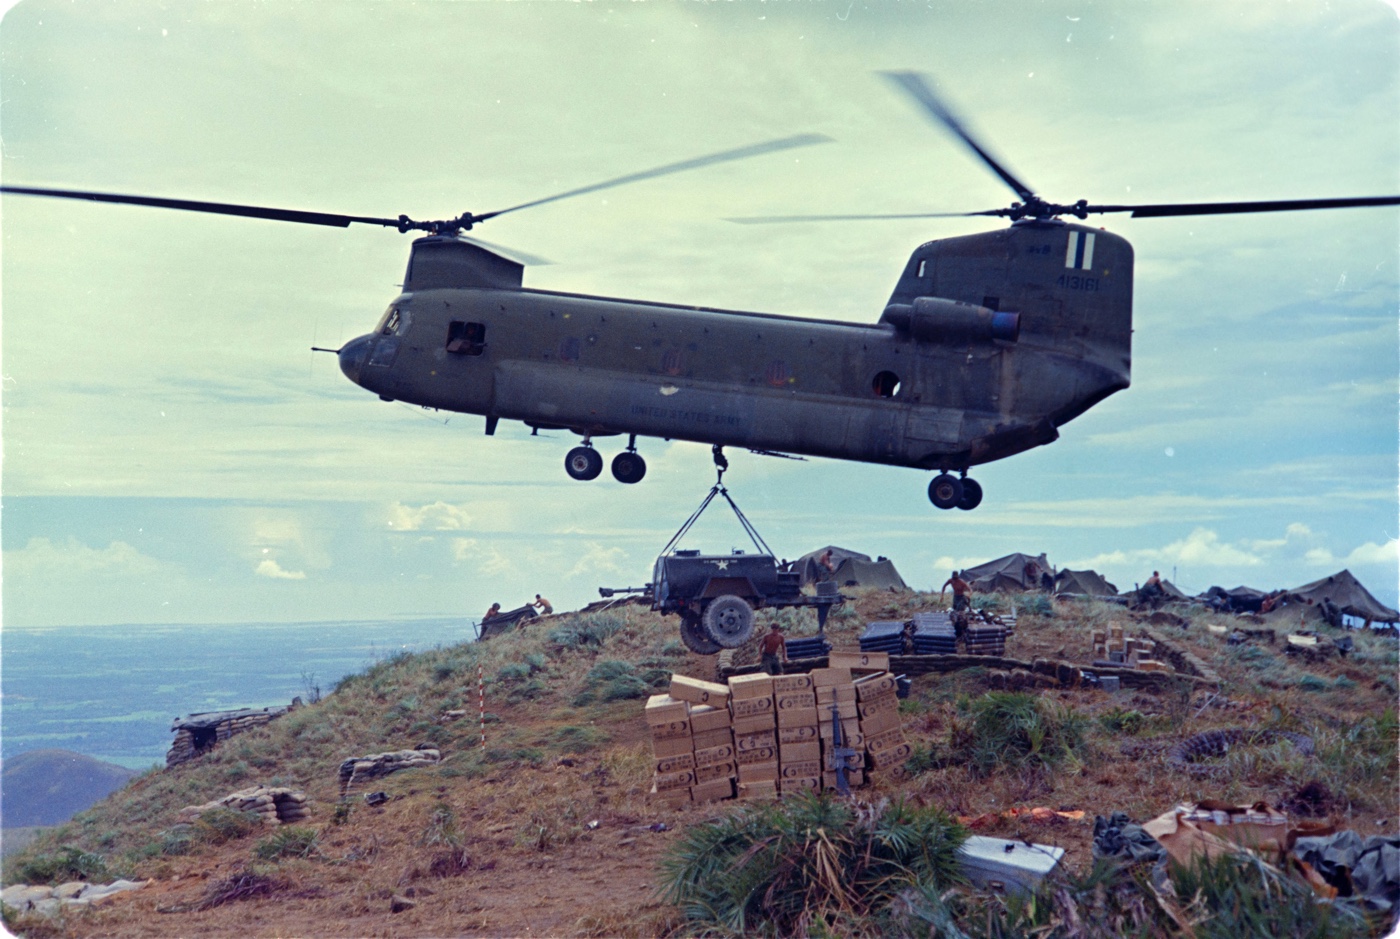 ch-47 delivers water trailer and supplies to the 101st airborne in vietnam